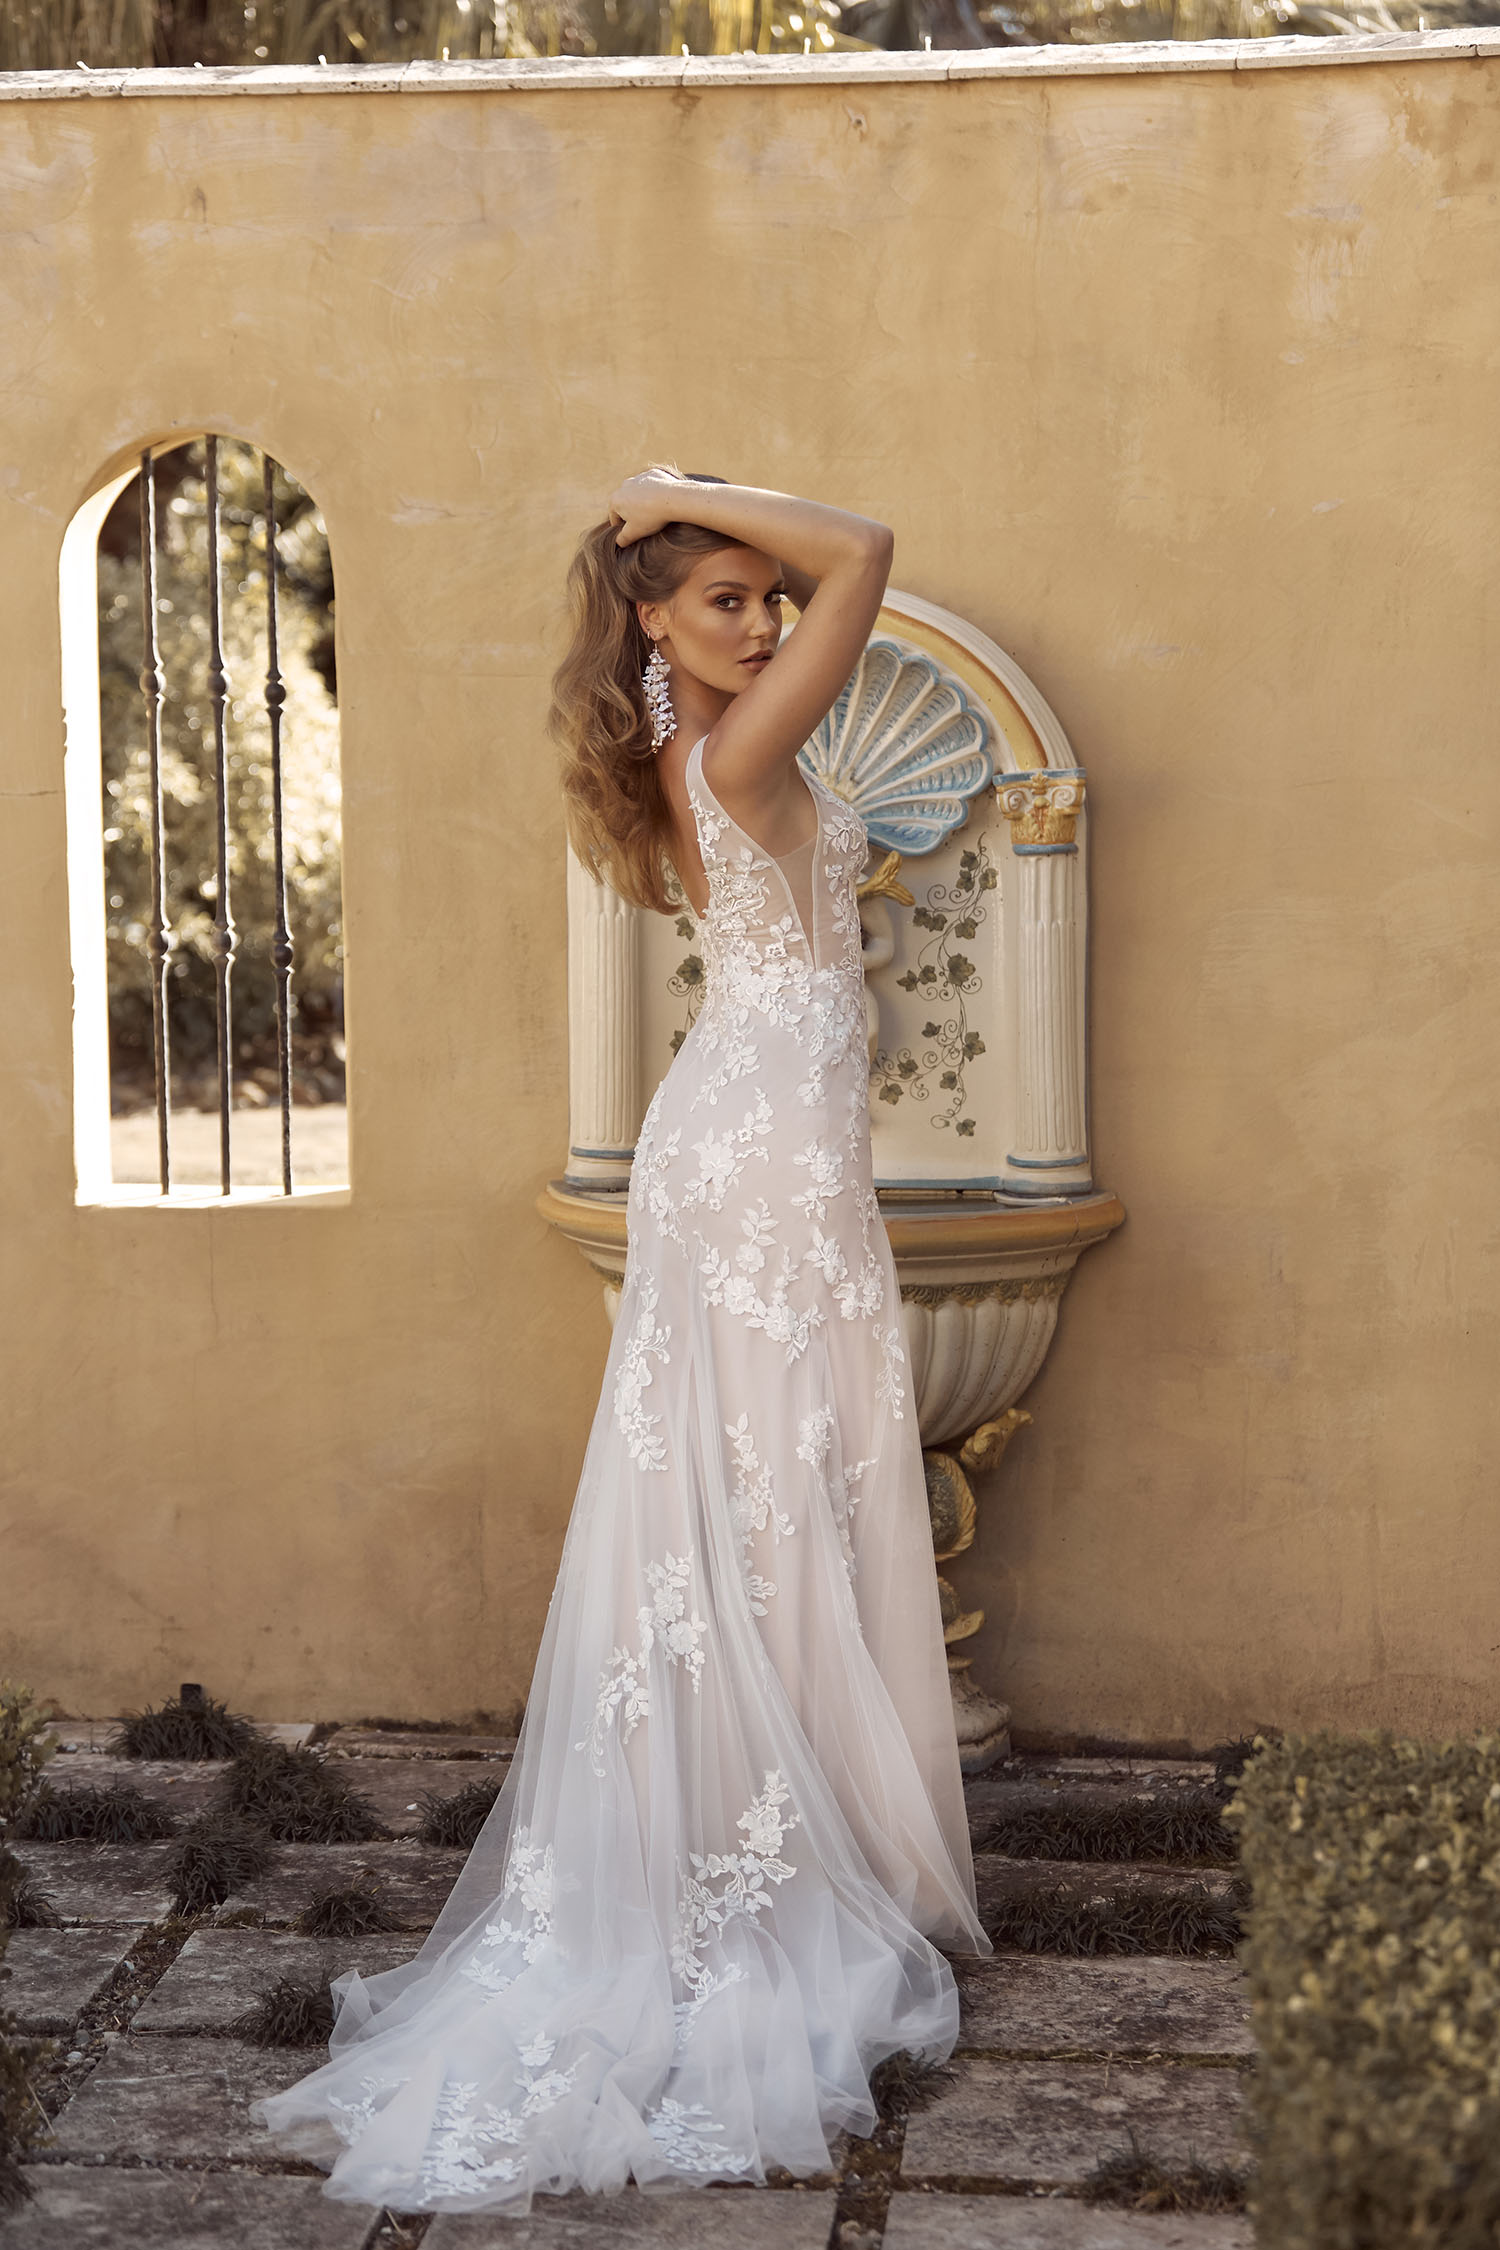 Demi Sweetheart Neckline Fit and Flare Wedding Dress by Madi Lane